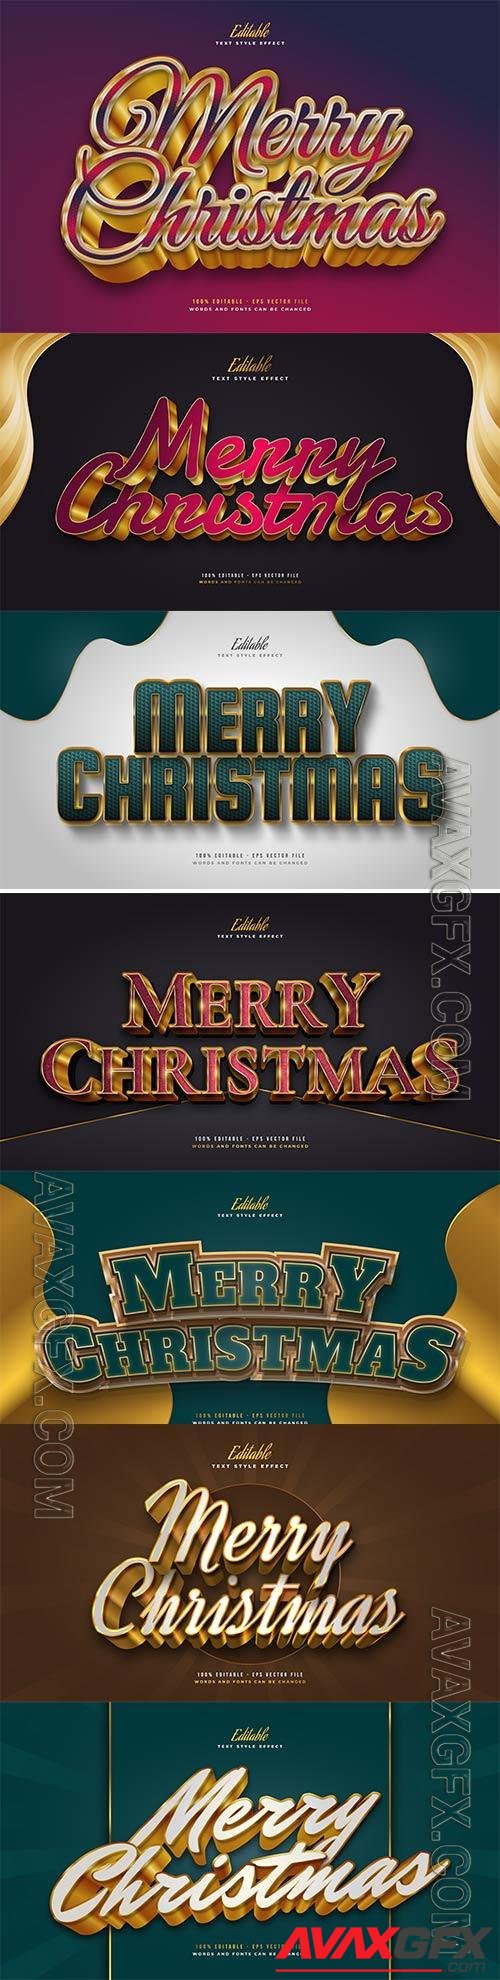 Merry christmas and happy new year 2022 editable vector text effects vol 25